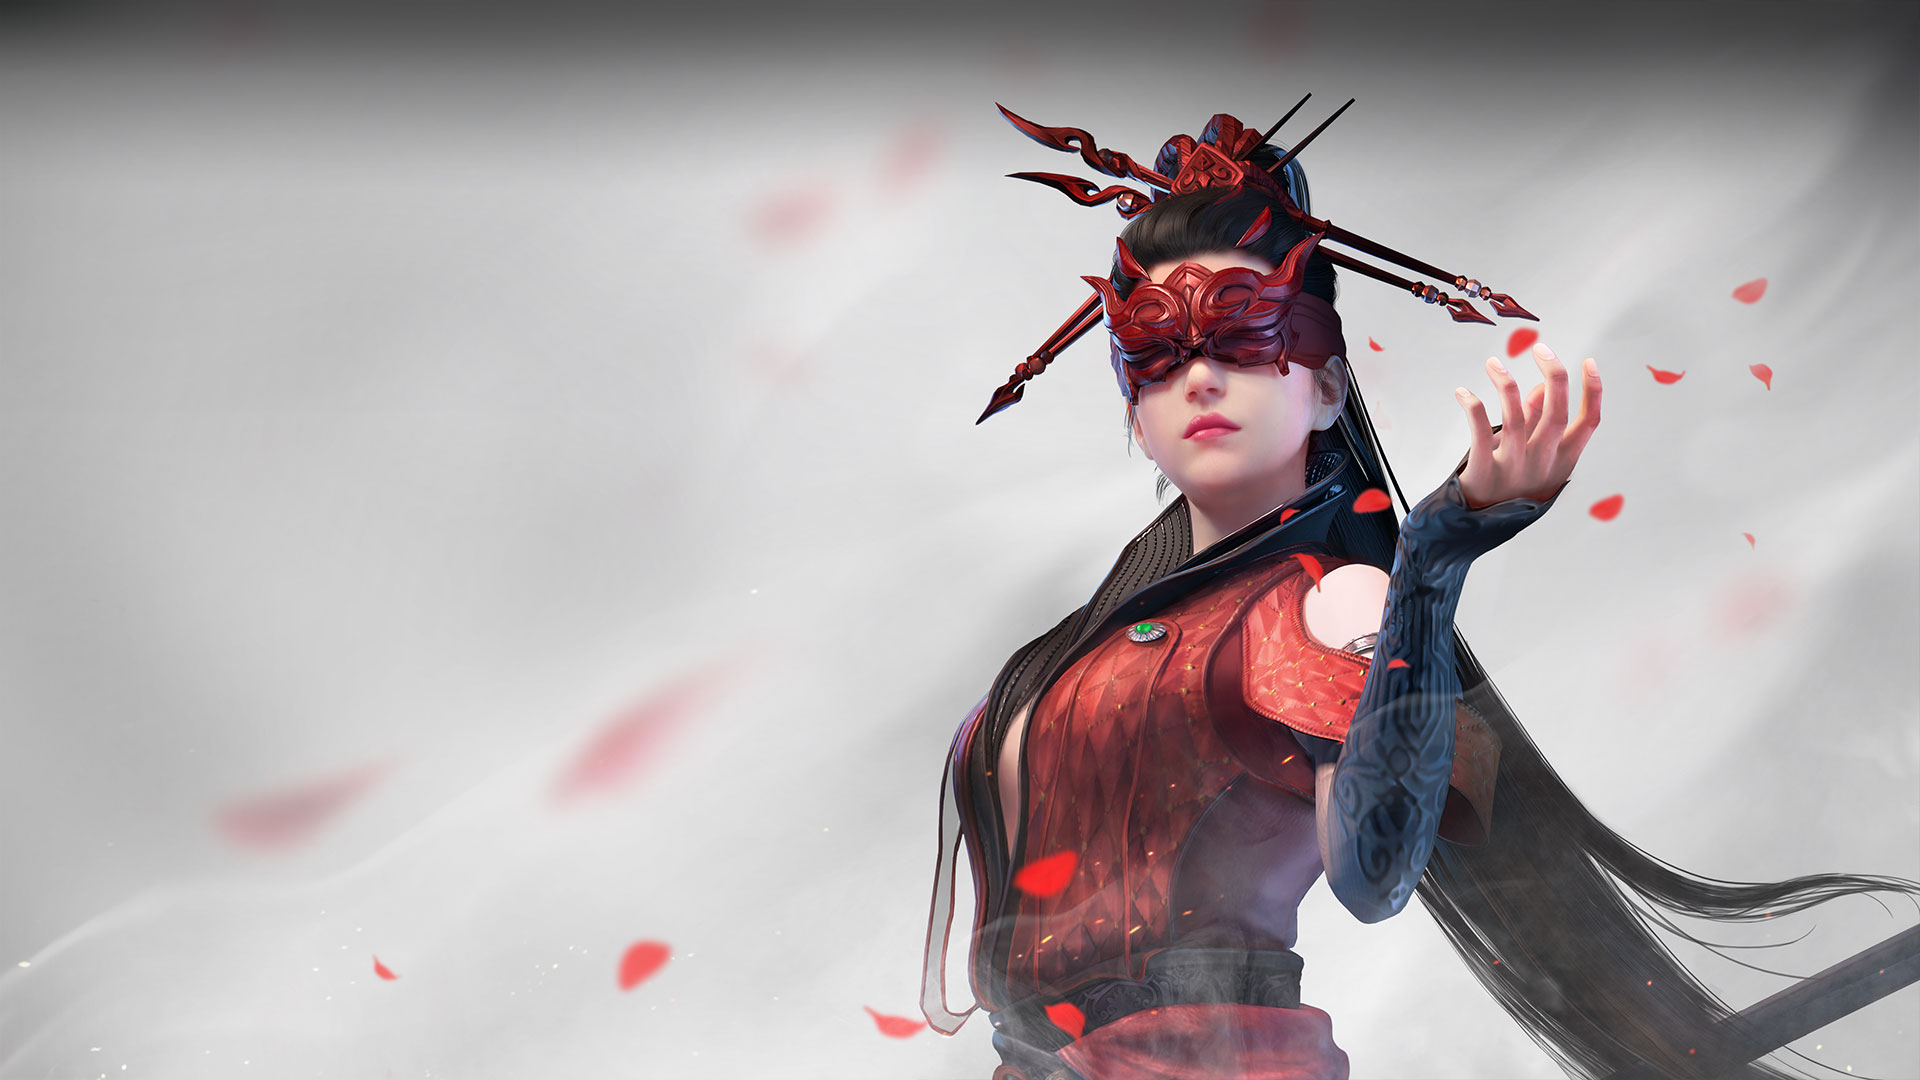 A swordswoman poses against a white textured background.